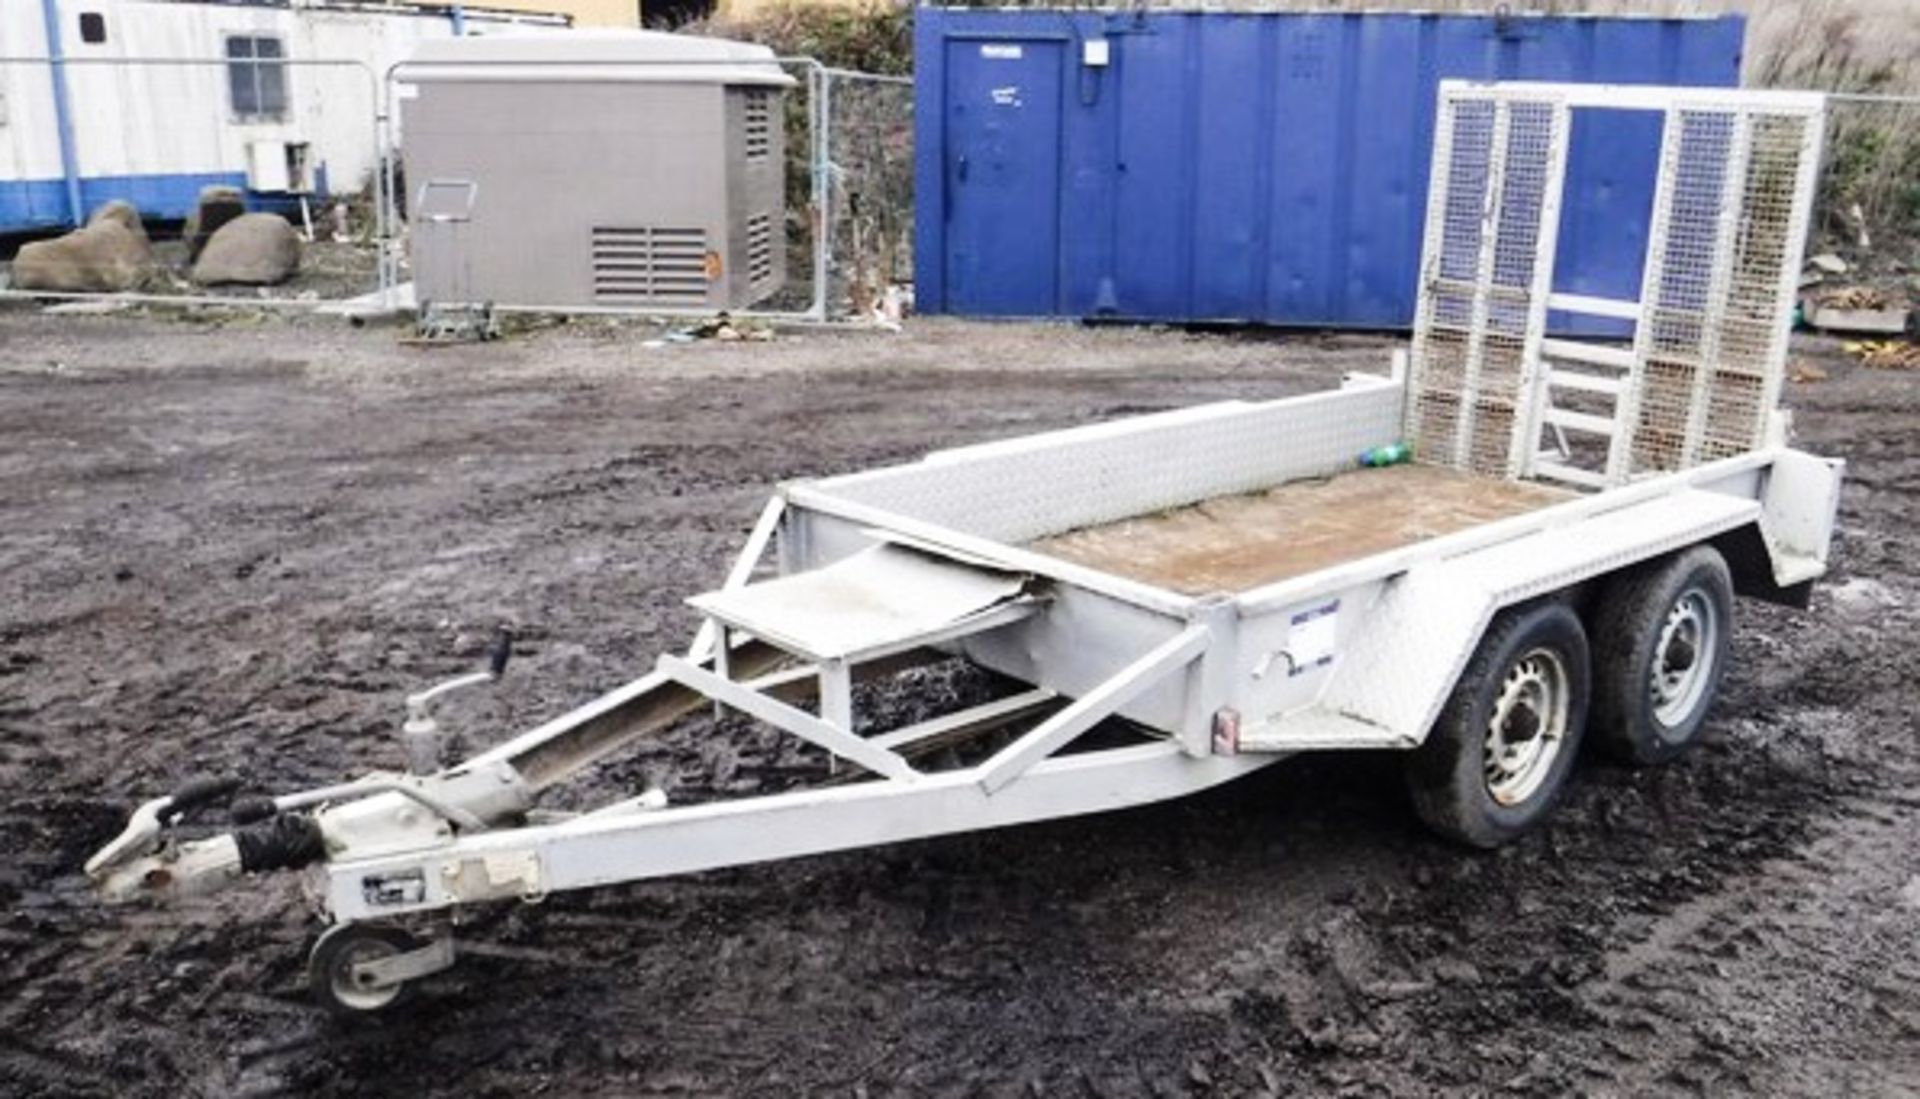 INDESPENSION 8' X 5' TWIN AXLE PLANT TRAILER WITH MESH RAMP, S/N G06600317